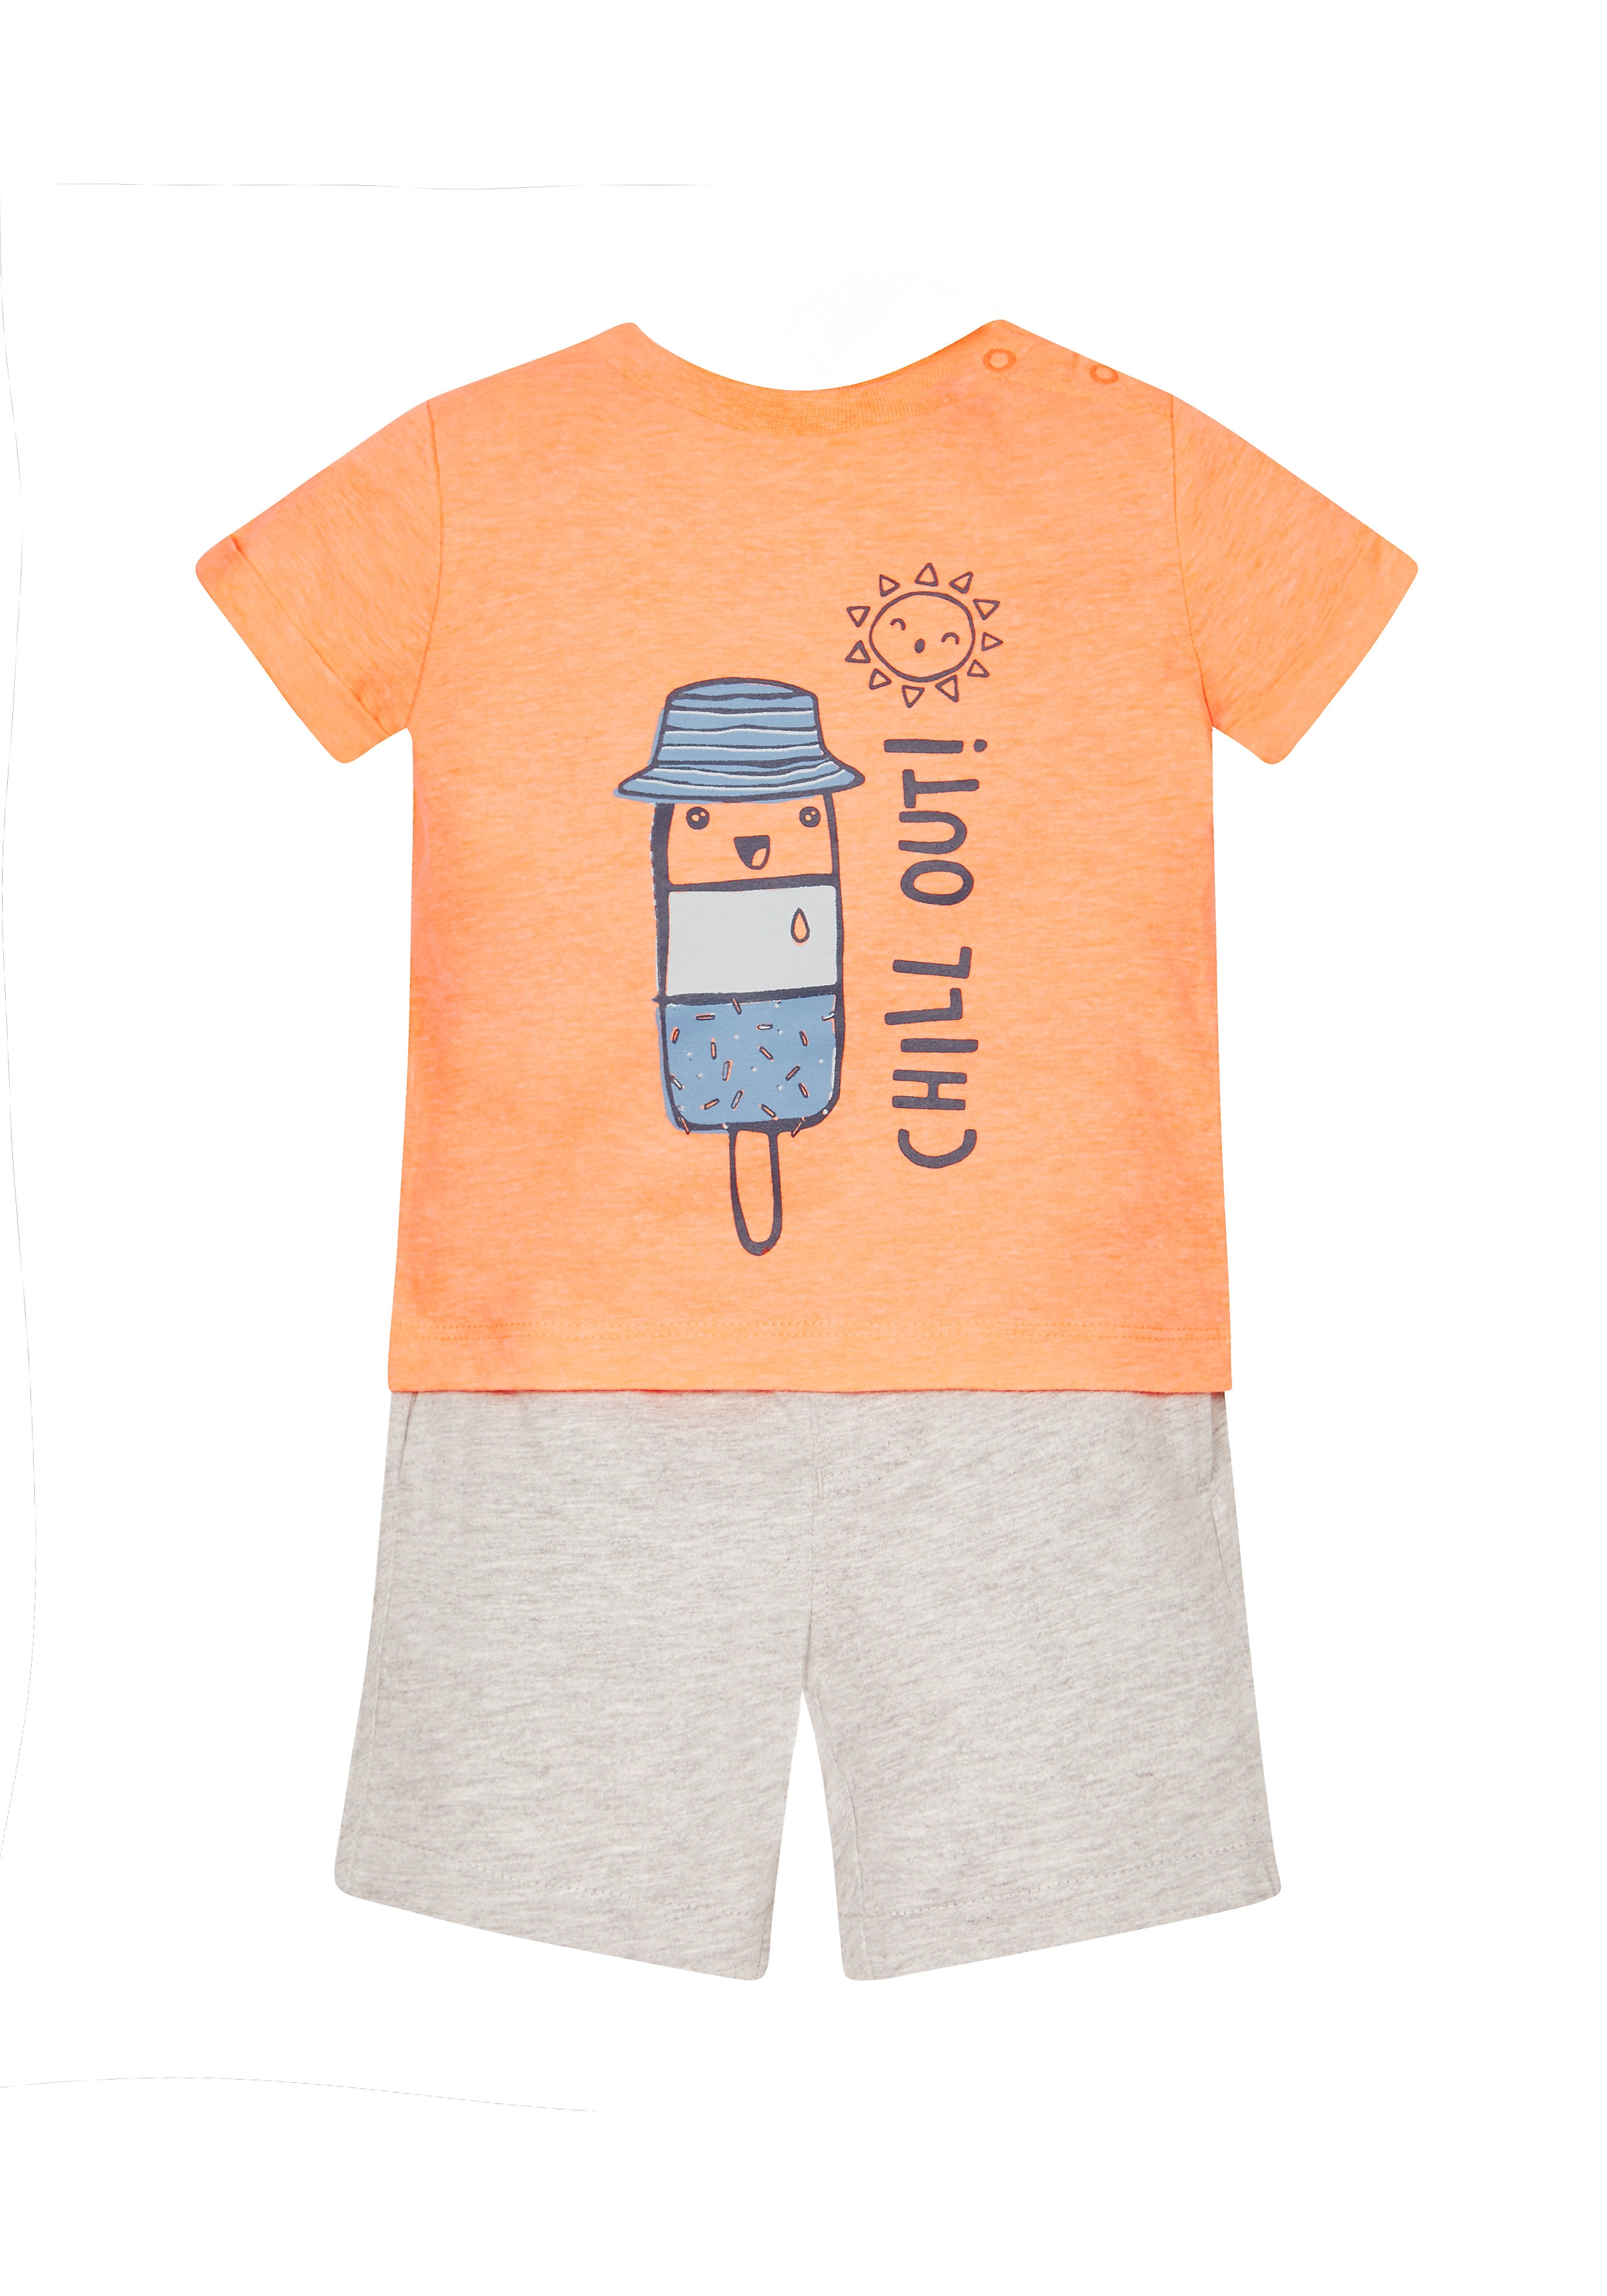 Mothercare | Boys 'Chill Out' Tee And Shorts Set - Orange 0